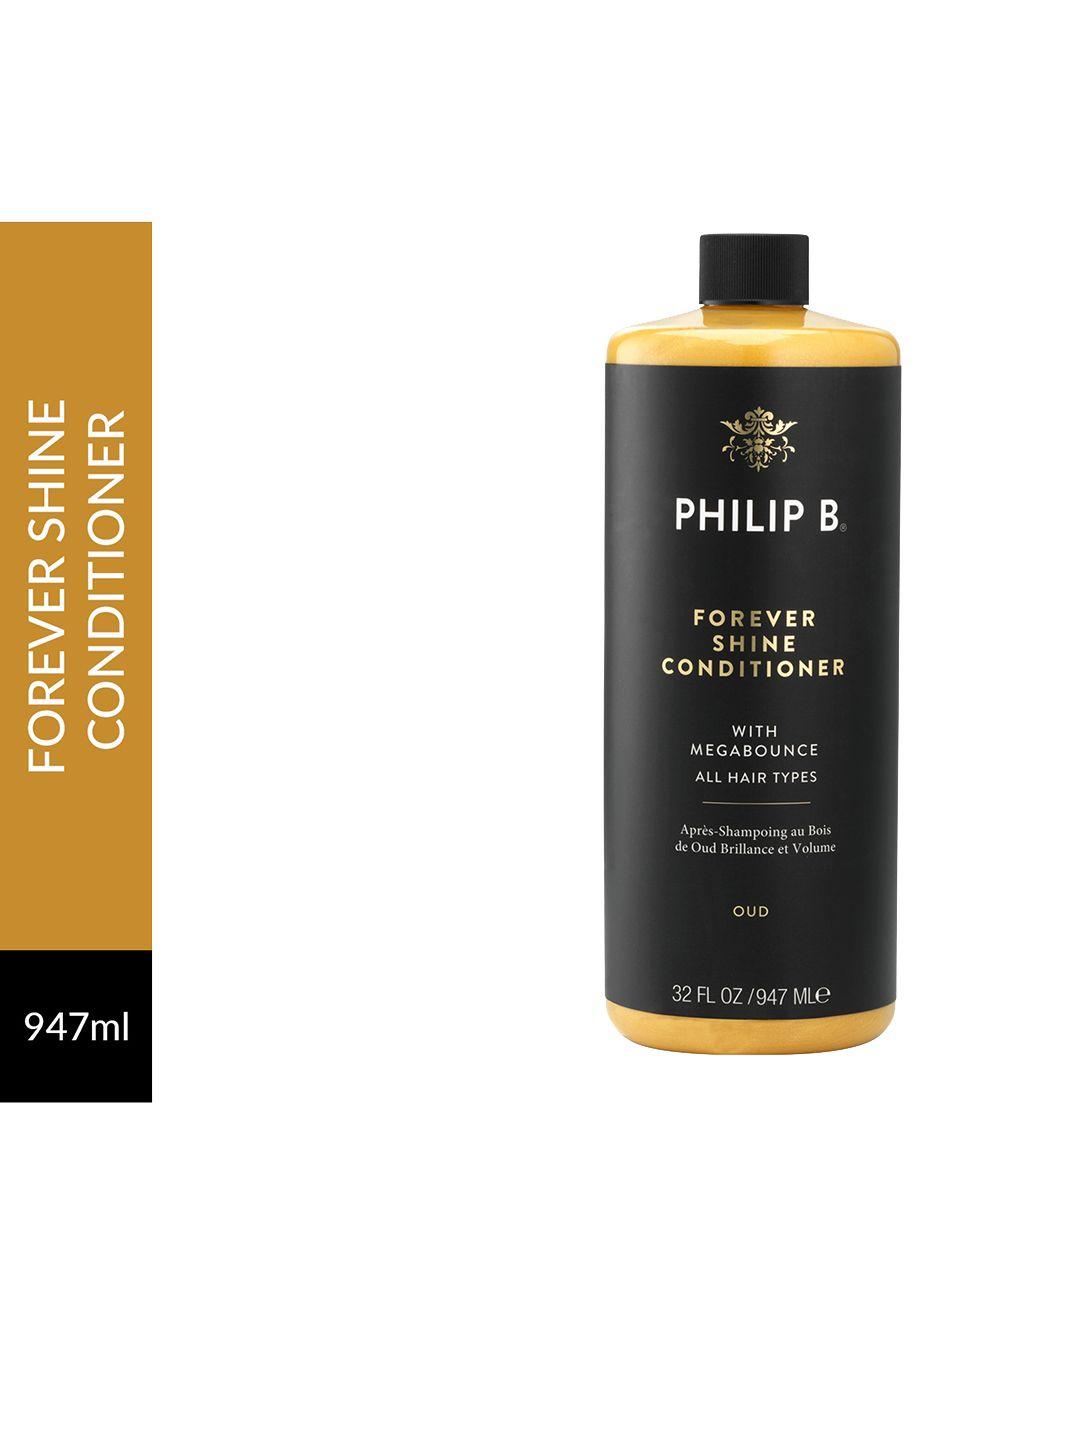 philip b forever shine oud hair conditioner with megabounce - 947 ml